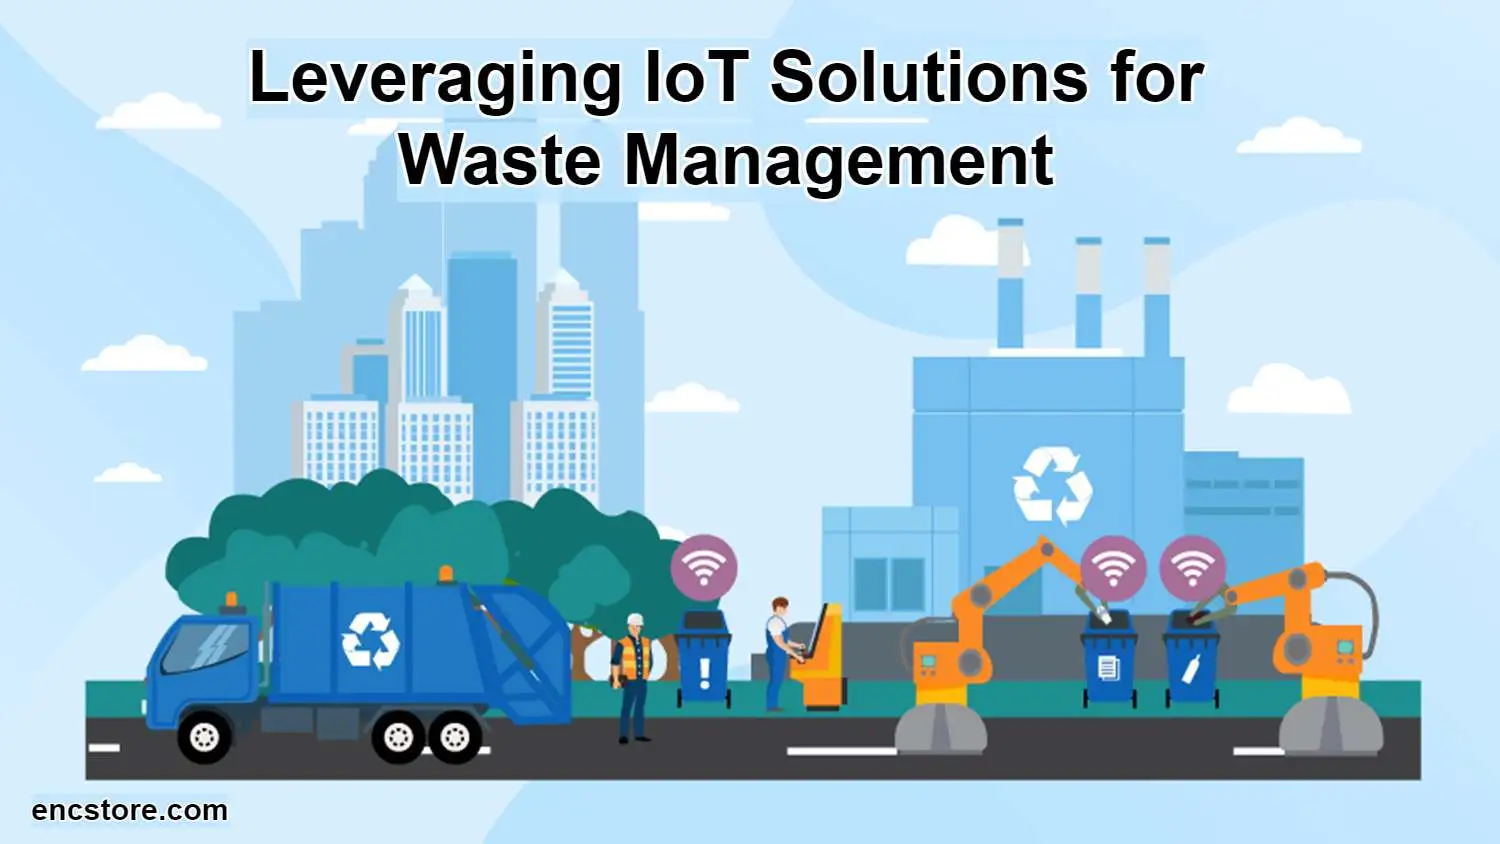 IoT Solutions for Waste Management